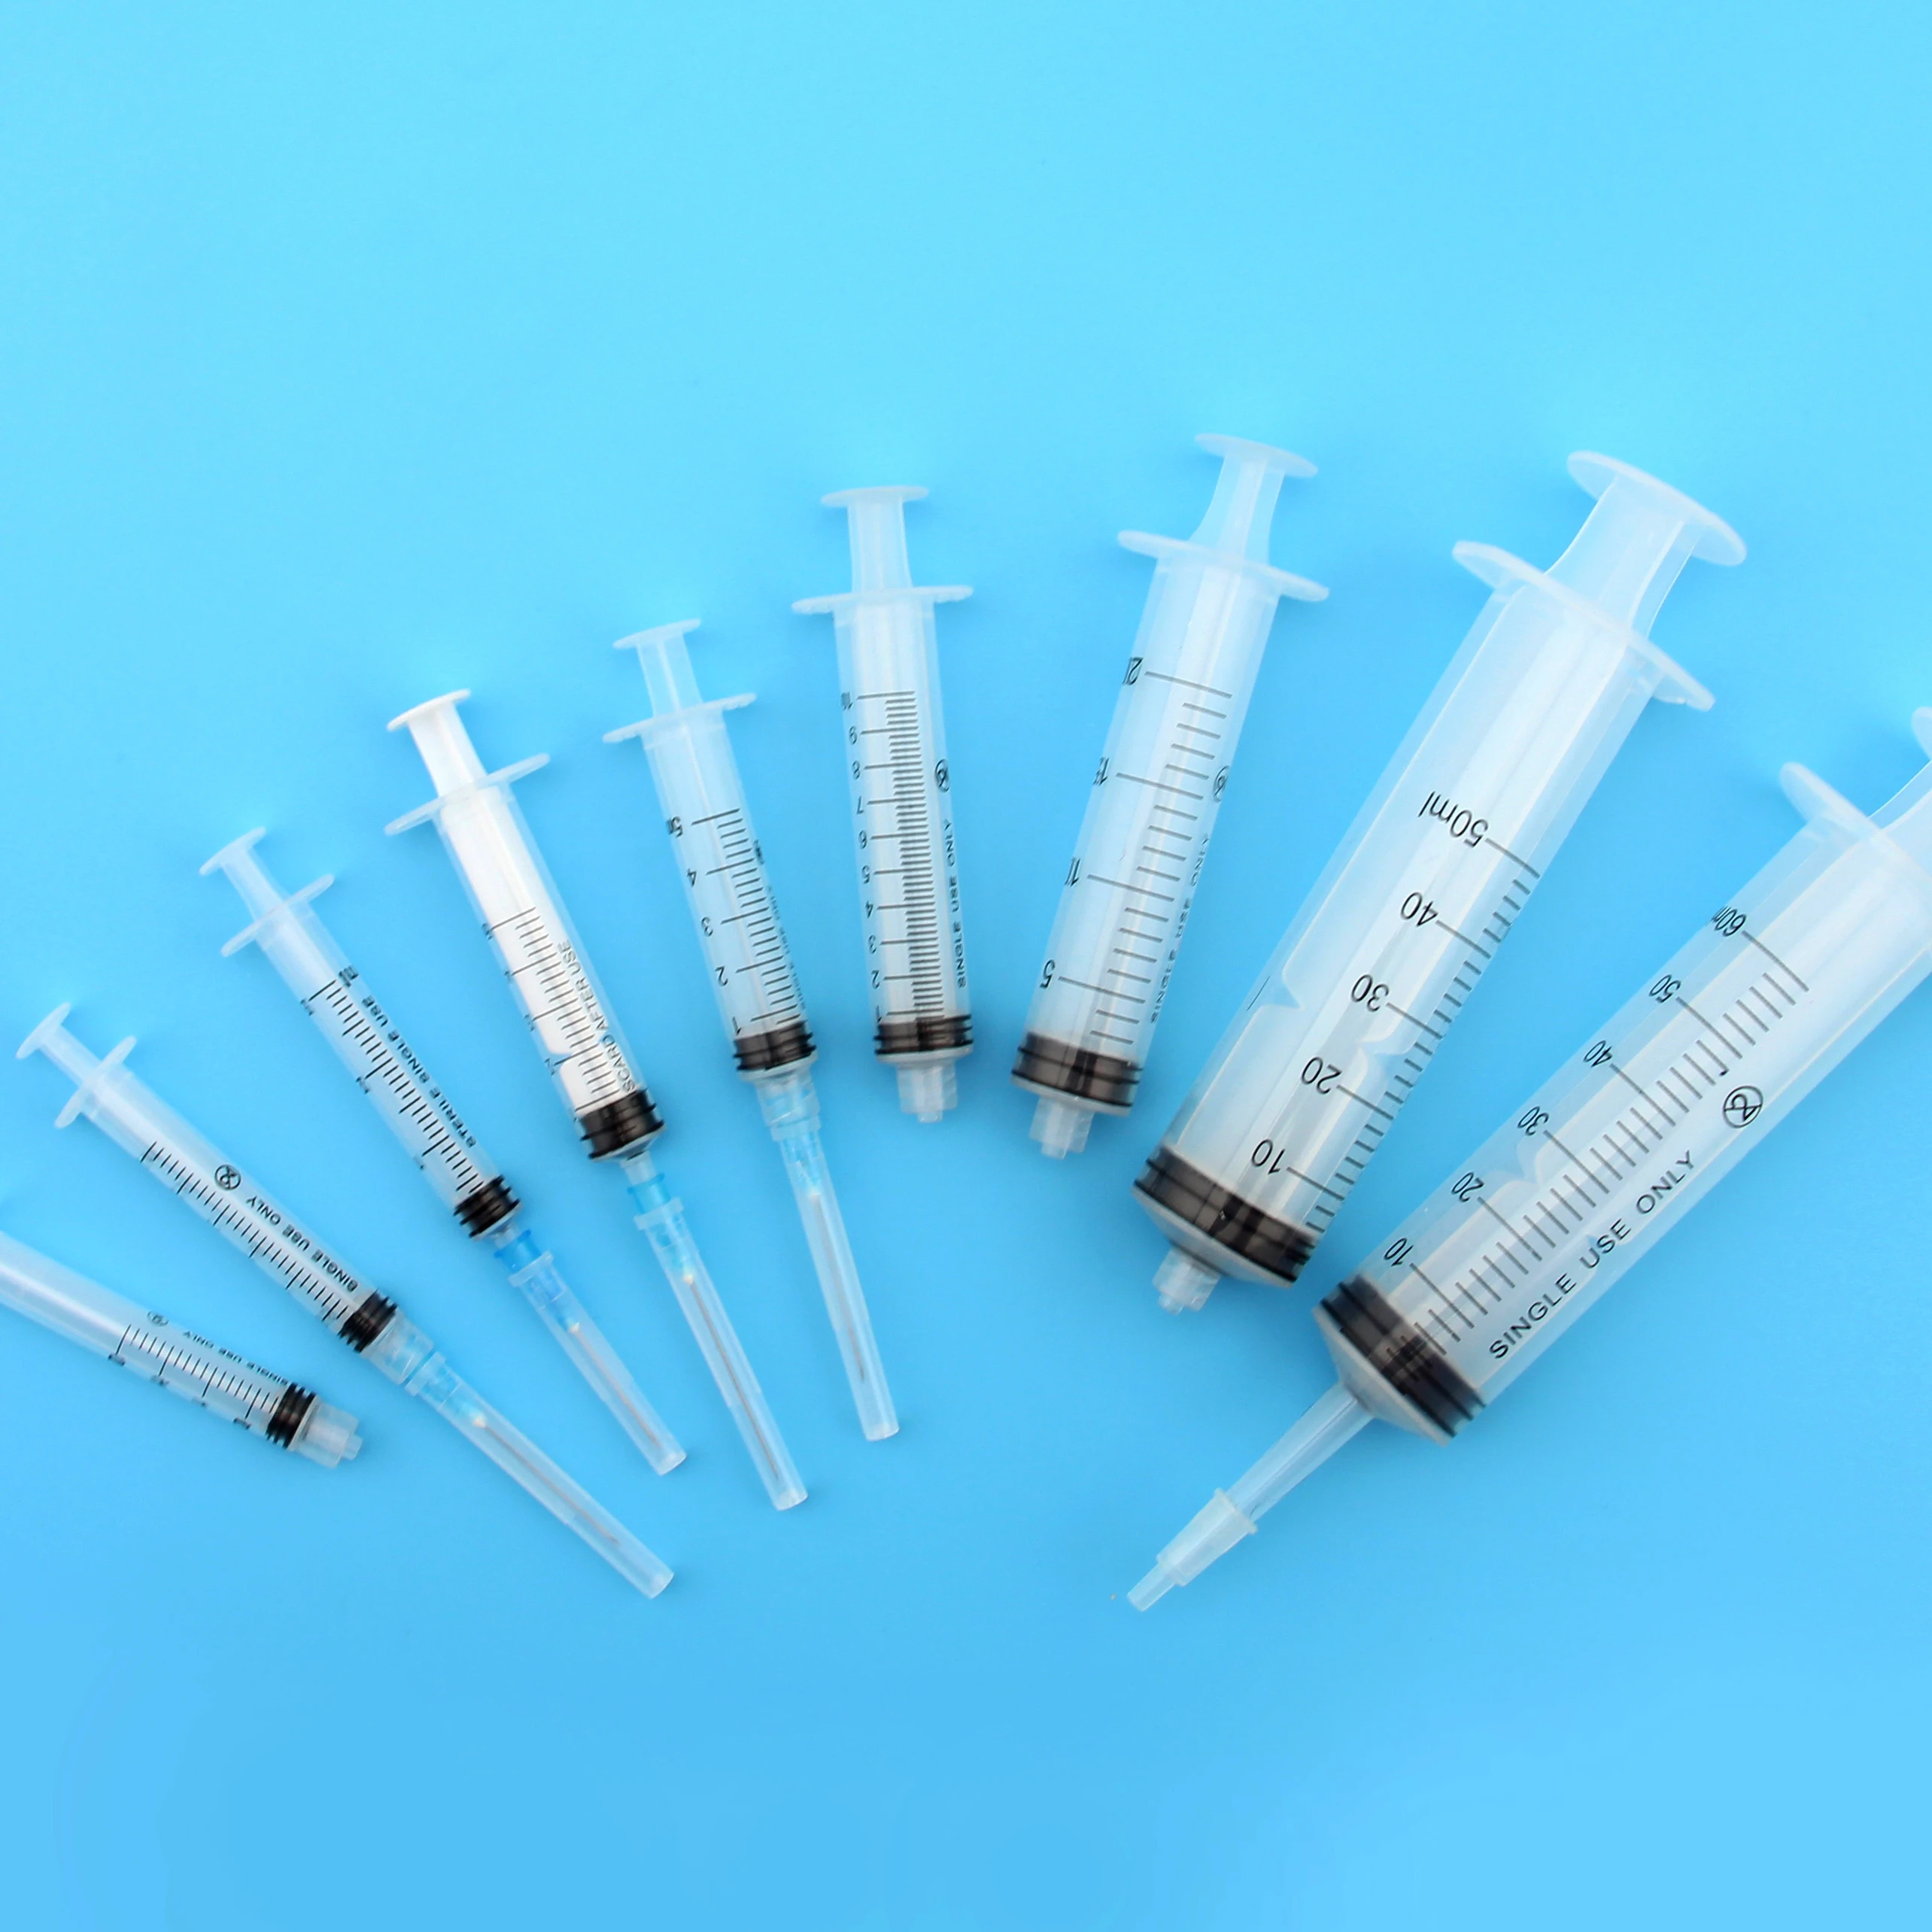 Sterile Medical Disposable Plastic Safety Vaccine Luer Lock And Luer Slip Syringes With Needle (1600366836635)